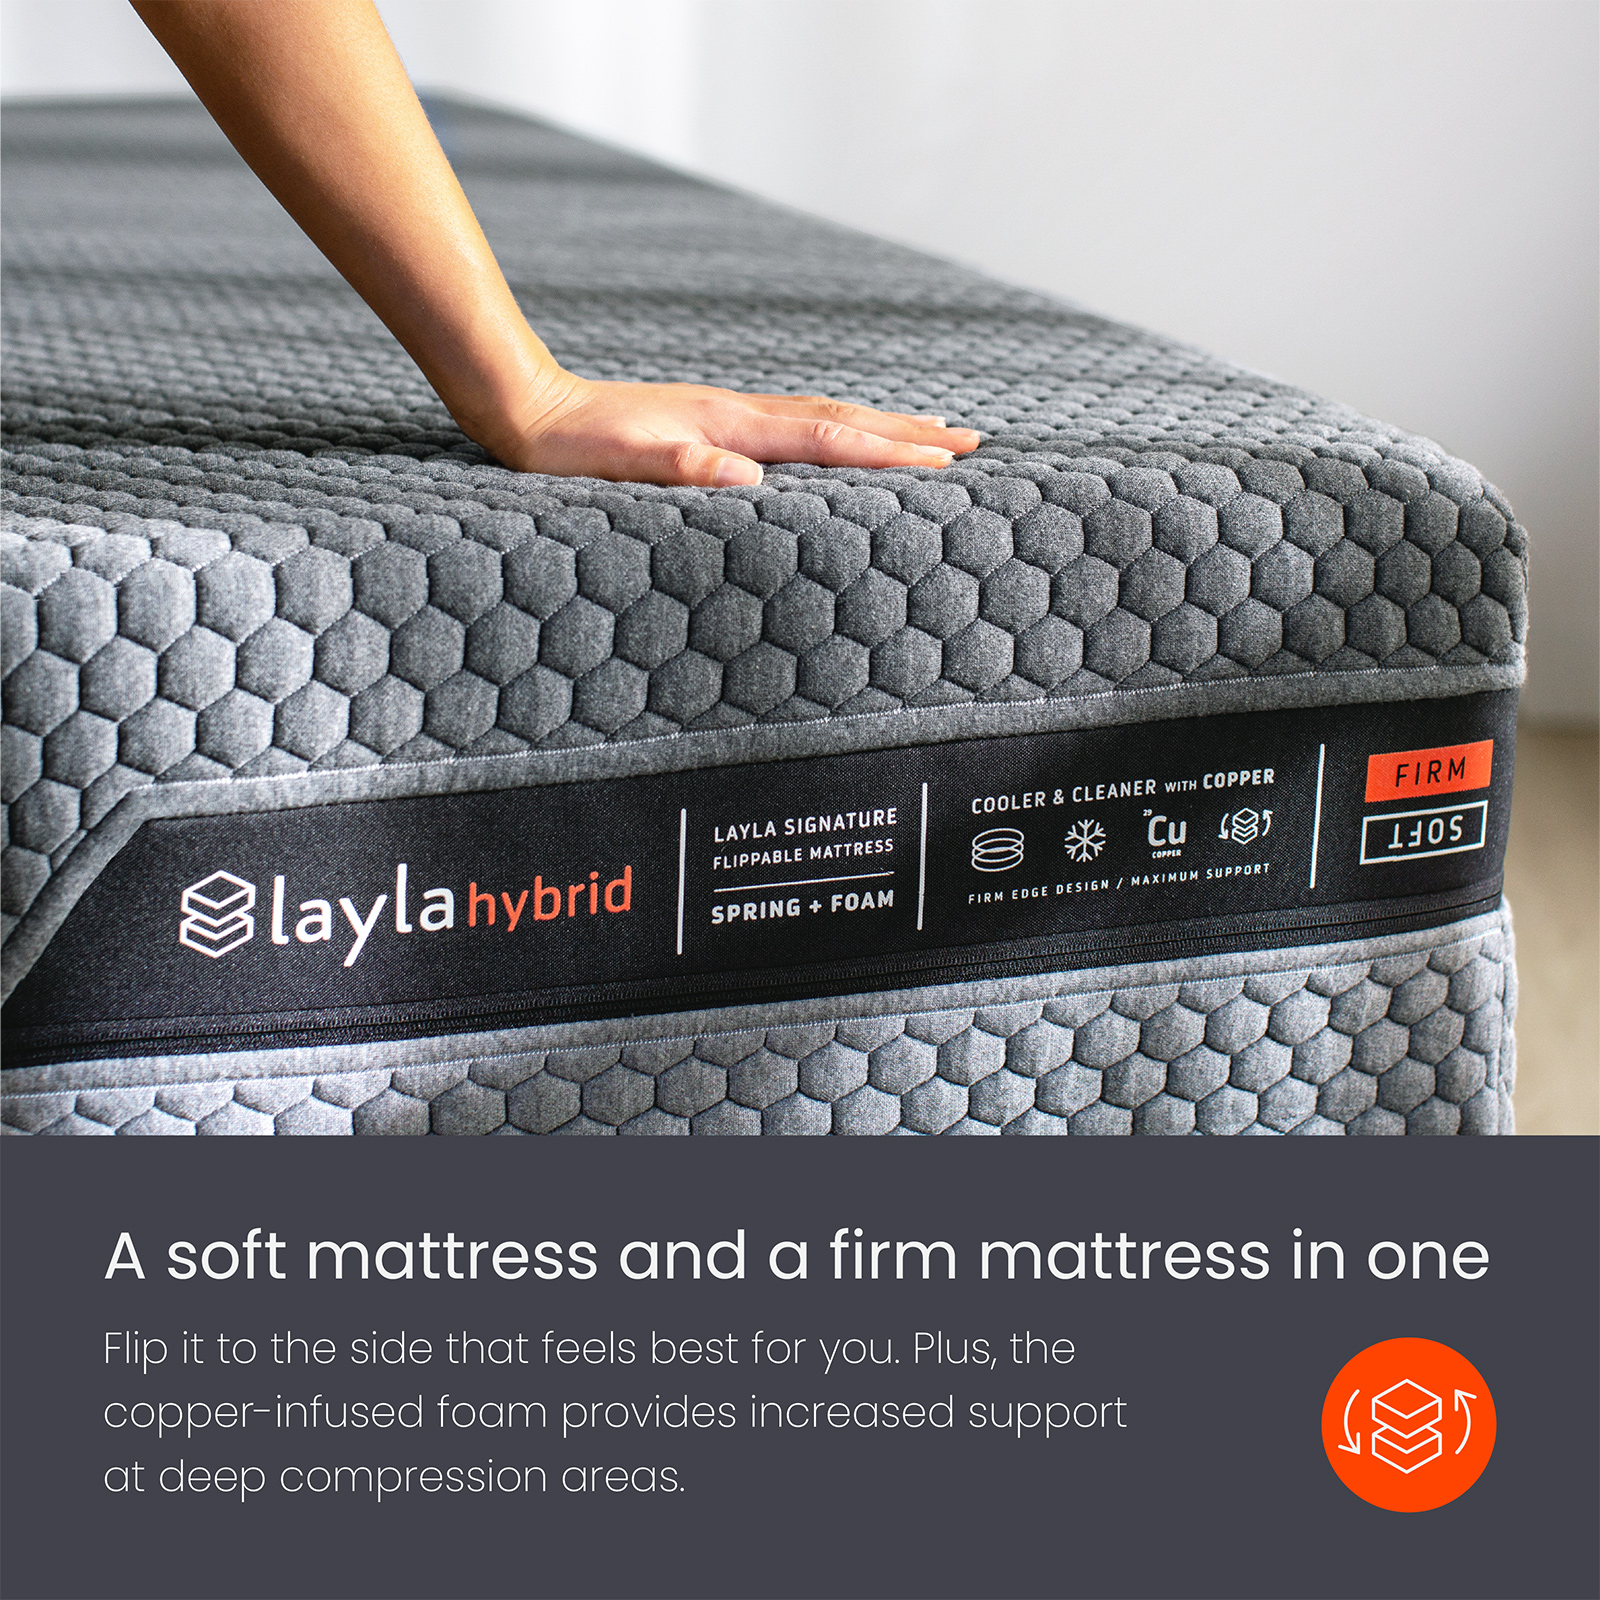 Layla Sleep Hybrid Foam Mattress | Flippable to a Soft or Firm Side (Queen) - image 3 of 7